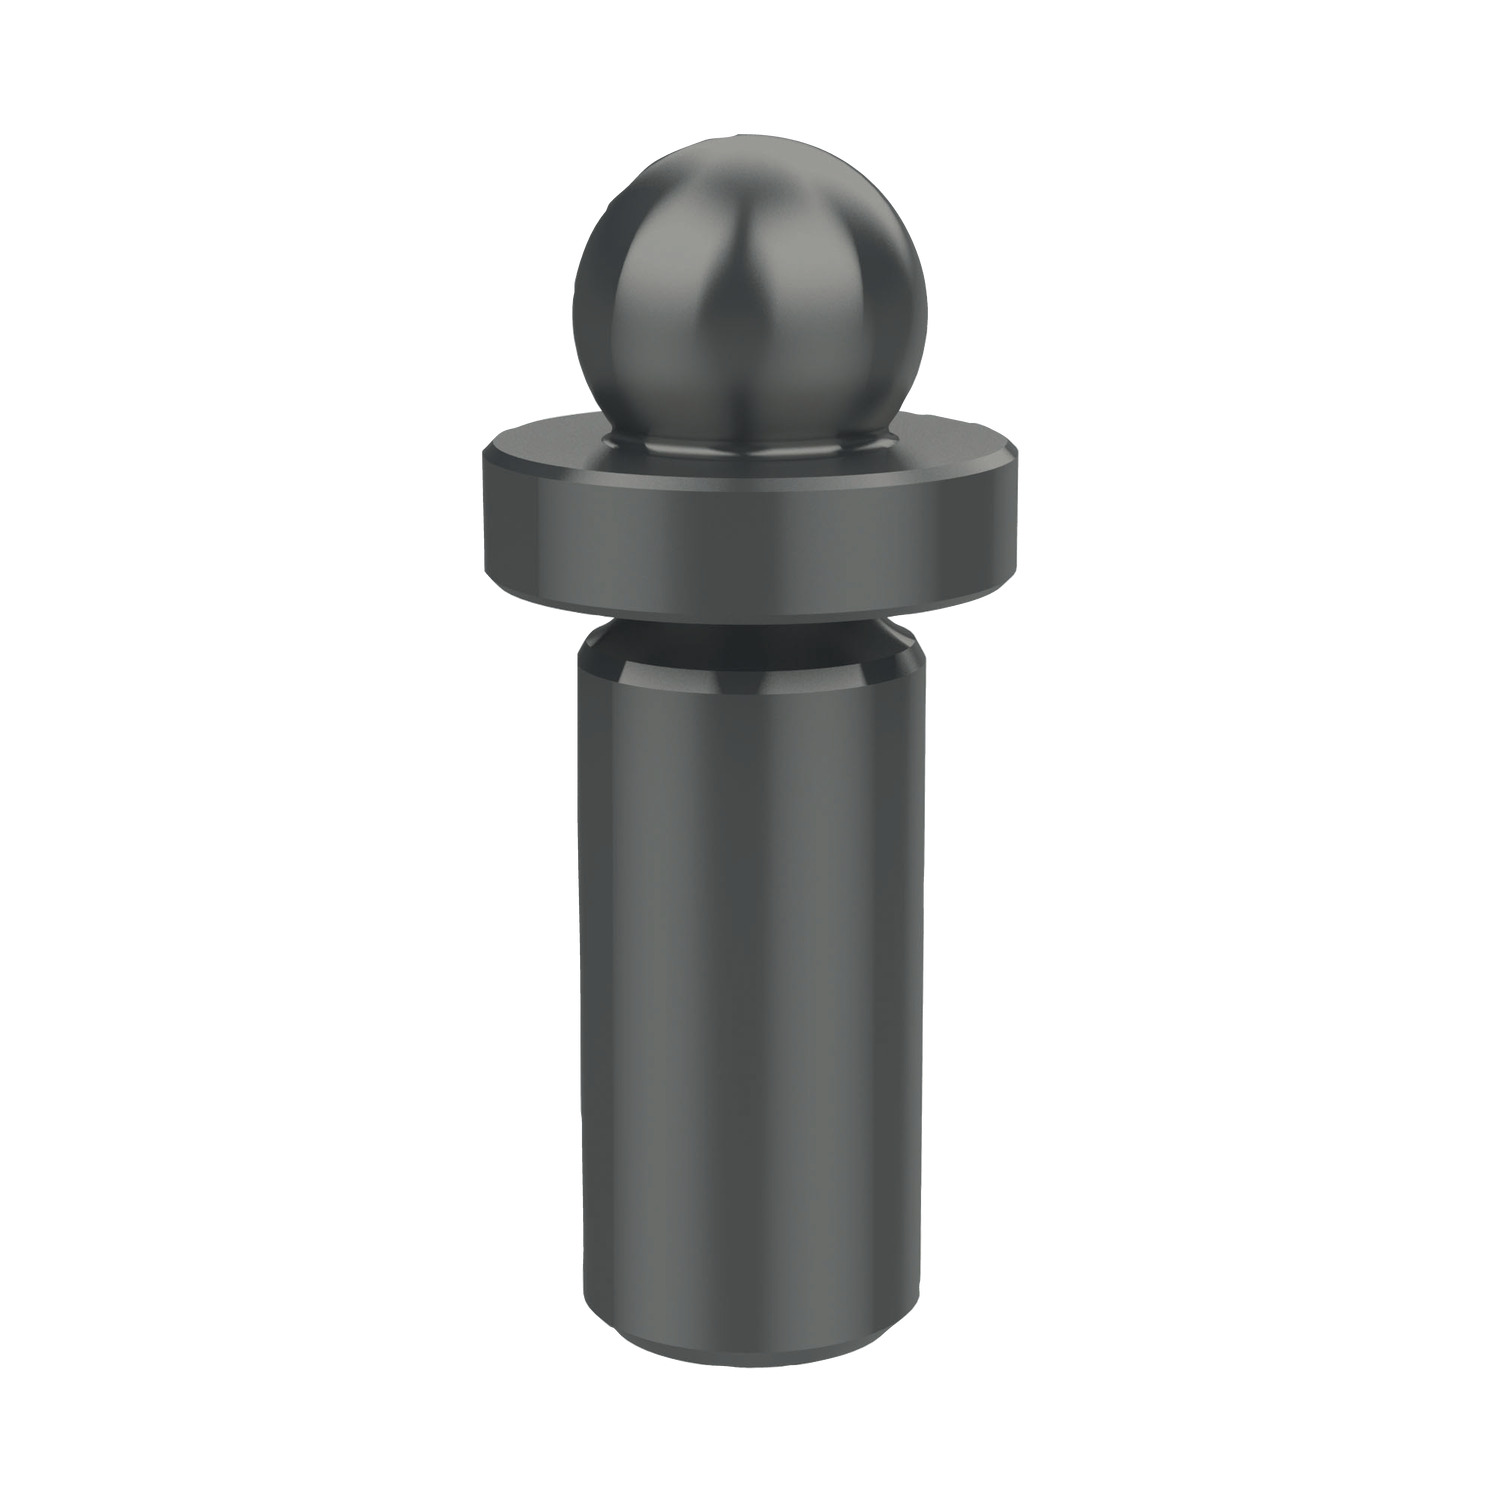 Product 20513, Tooling Balls - Carbide imperial / 